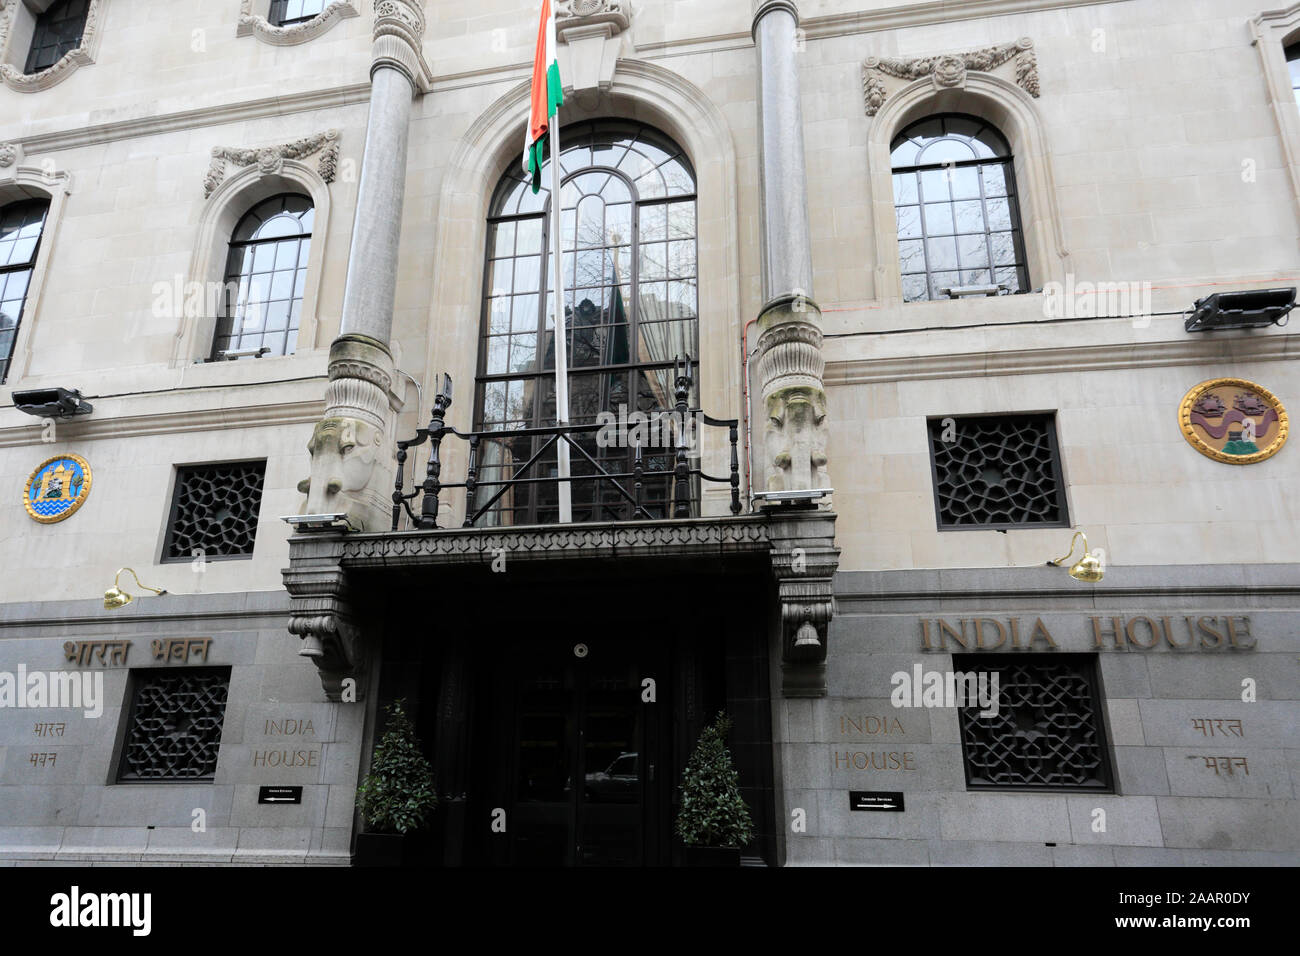 Exterior of India House, Aldwych, London, England Stock Photo